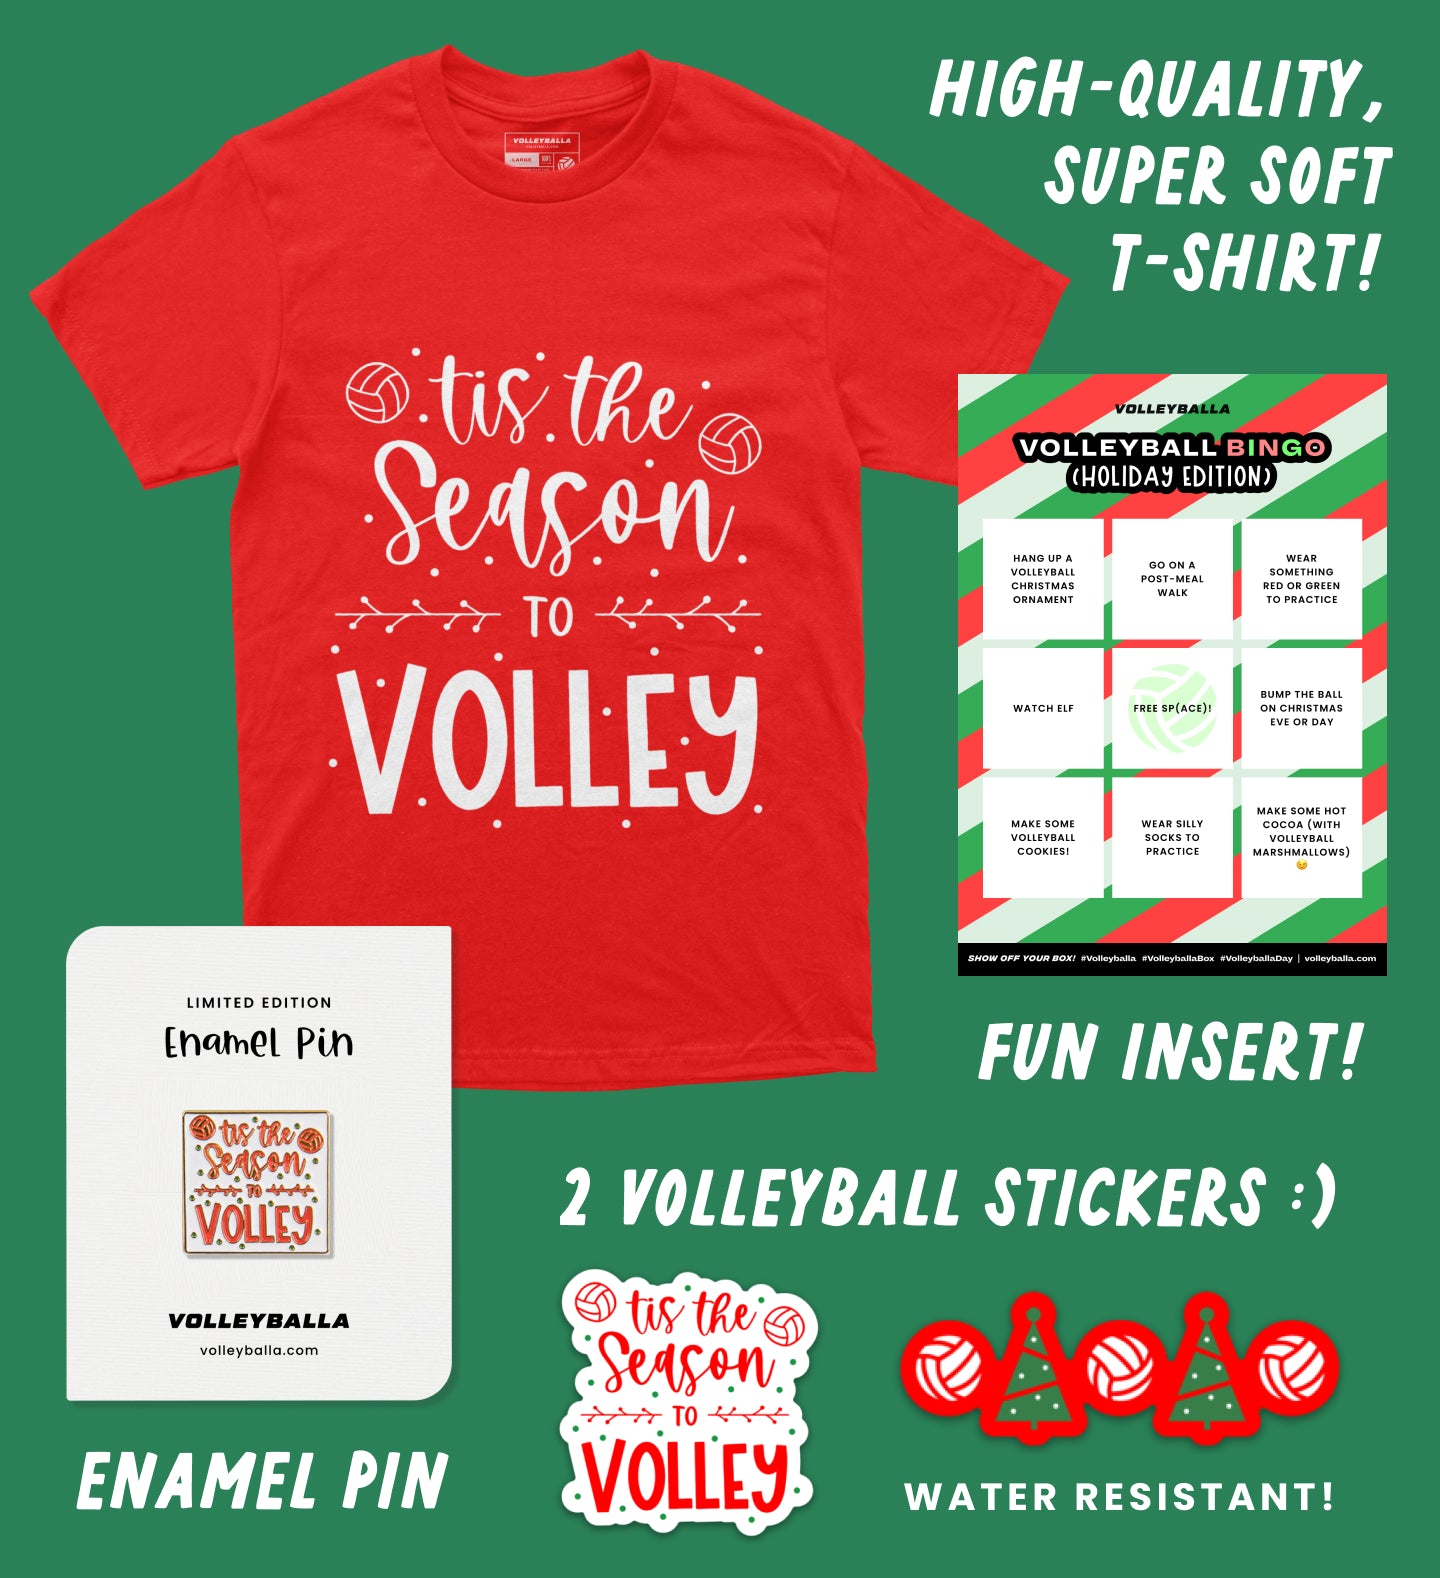 Tis the Season to Volley - Volleyball Gift Box